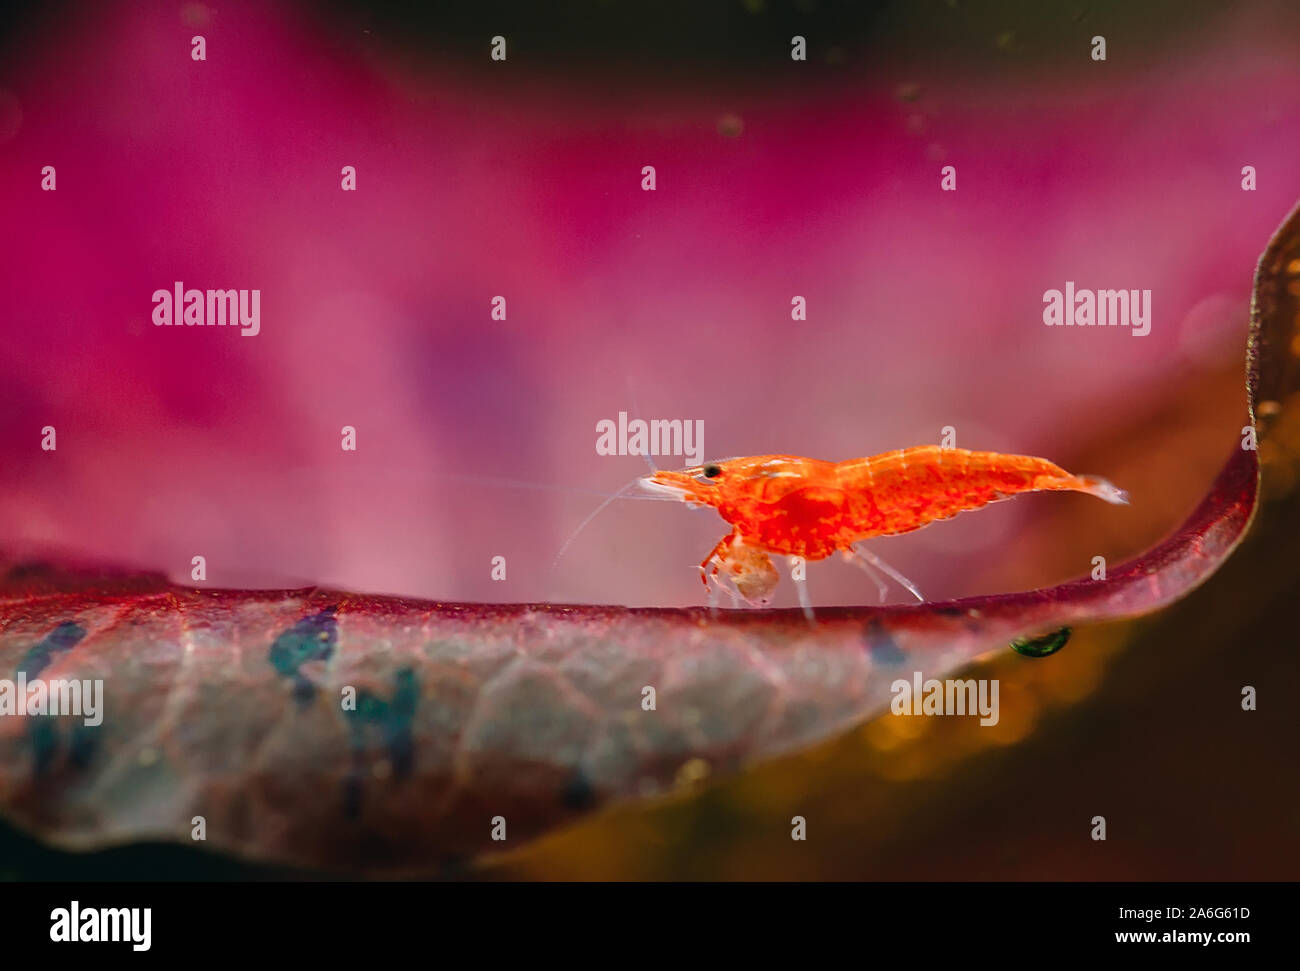 Big fire red or cherry dwarf shrimp with green background in fresh water aquarium tank Stock Photo